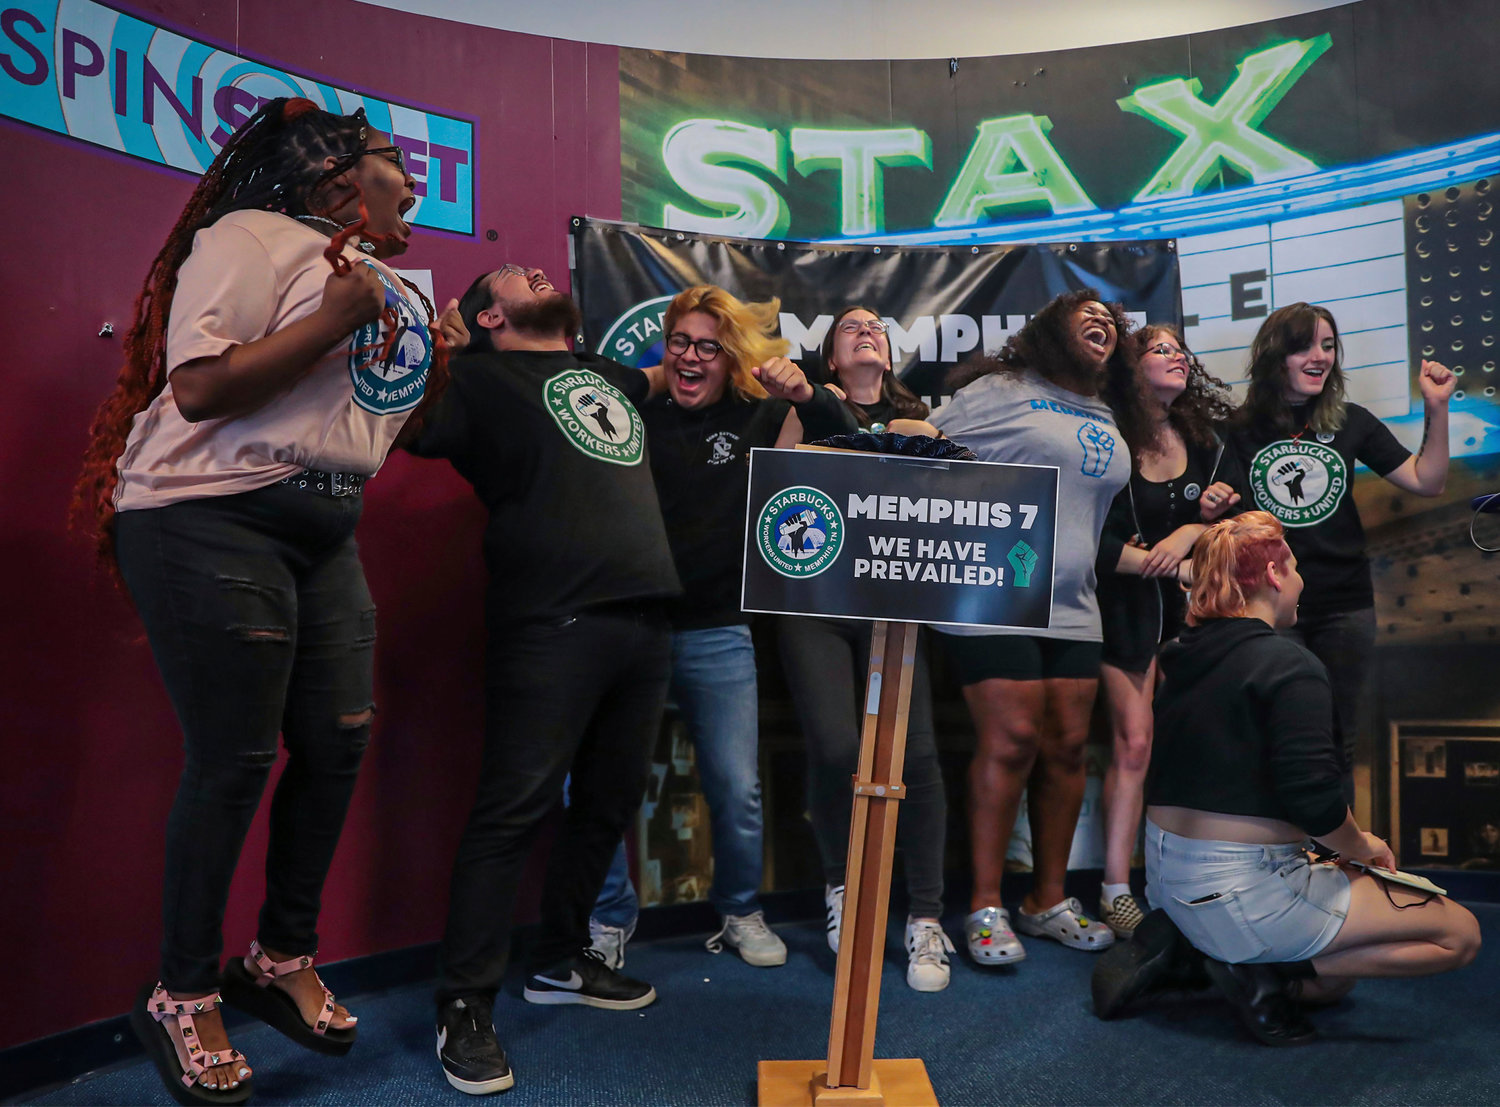 A group of fired Starbucks employees celebrate the result of a vote to unionize one of the coffee company's locations in Memphis, Tennessee, last June. Starbucks said they were fired for violating company policies, but the seven say they were let go in retaliation for unionization efforts.